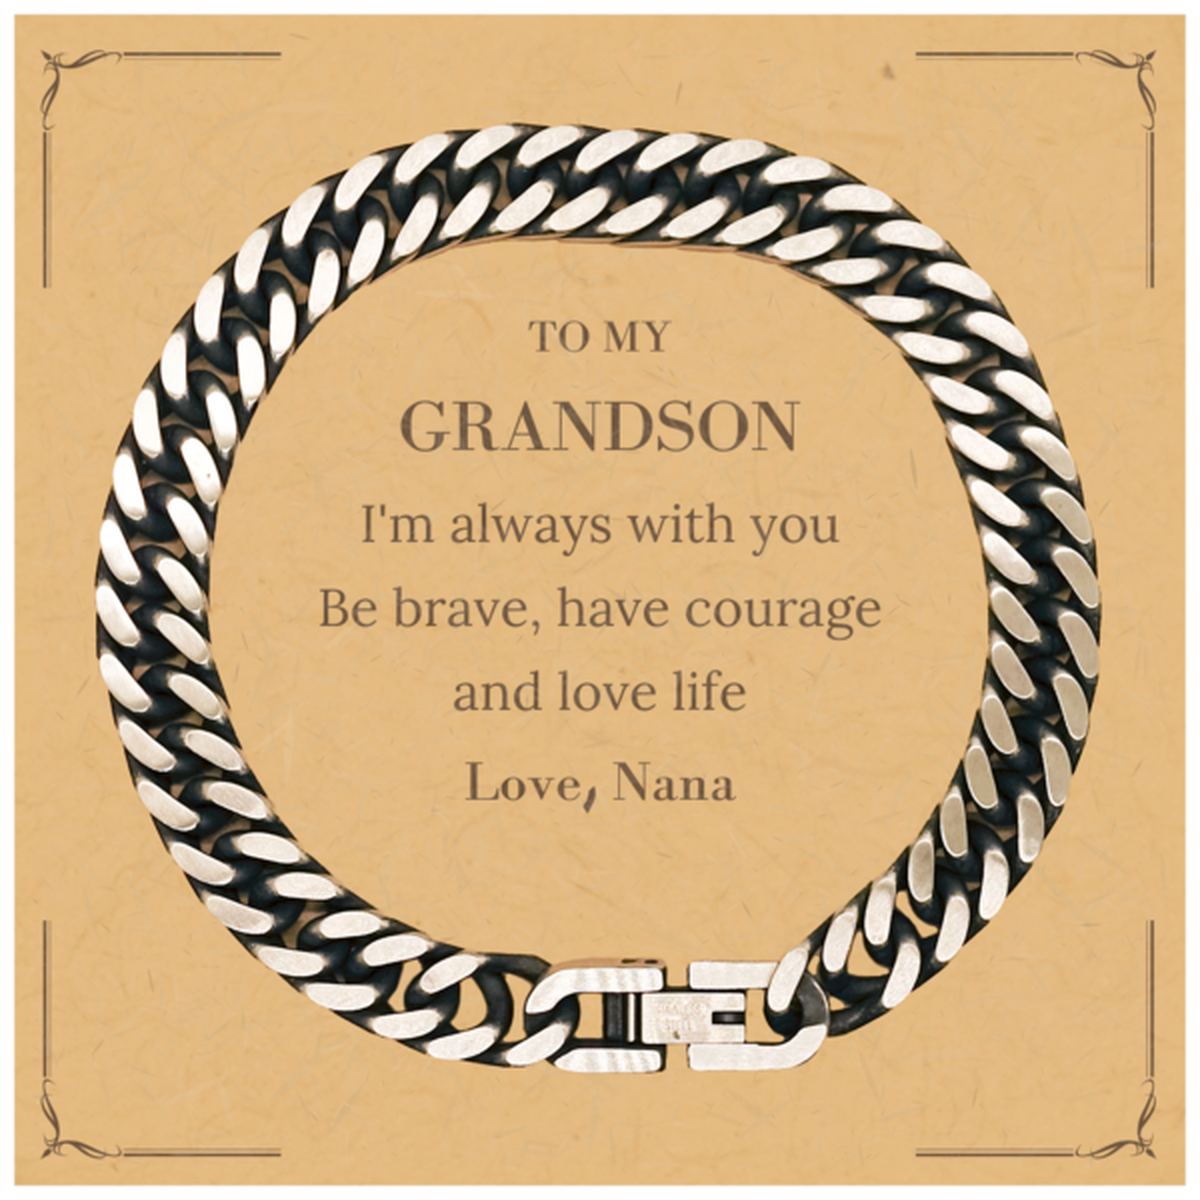 To My Grandson Gifts from Nana, Unique Cuban Link Chain Bracelet Inspirational Christmas Birthday Graduation Gifts for Grandson I'm always with you. Be brave, have courage and love life. Love, Nana